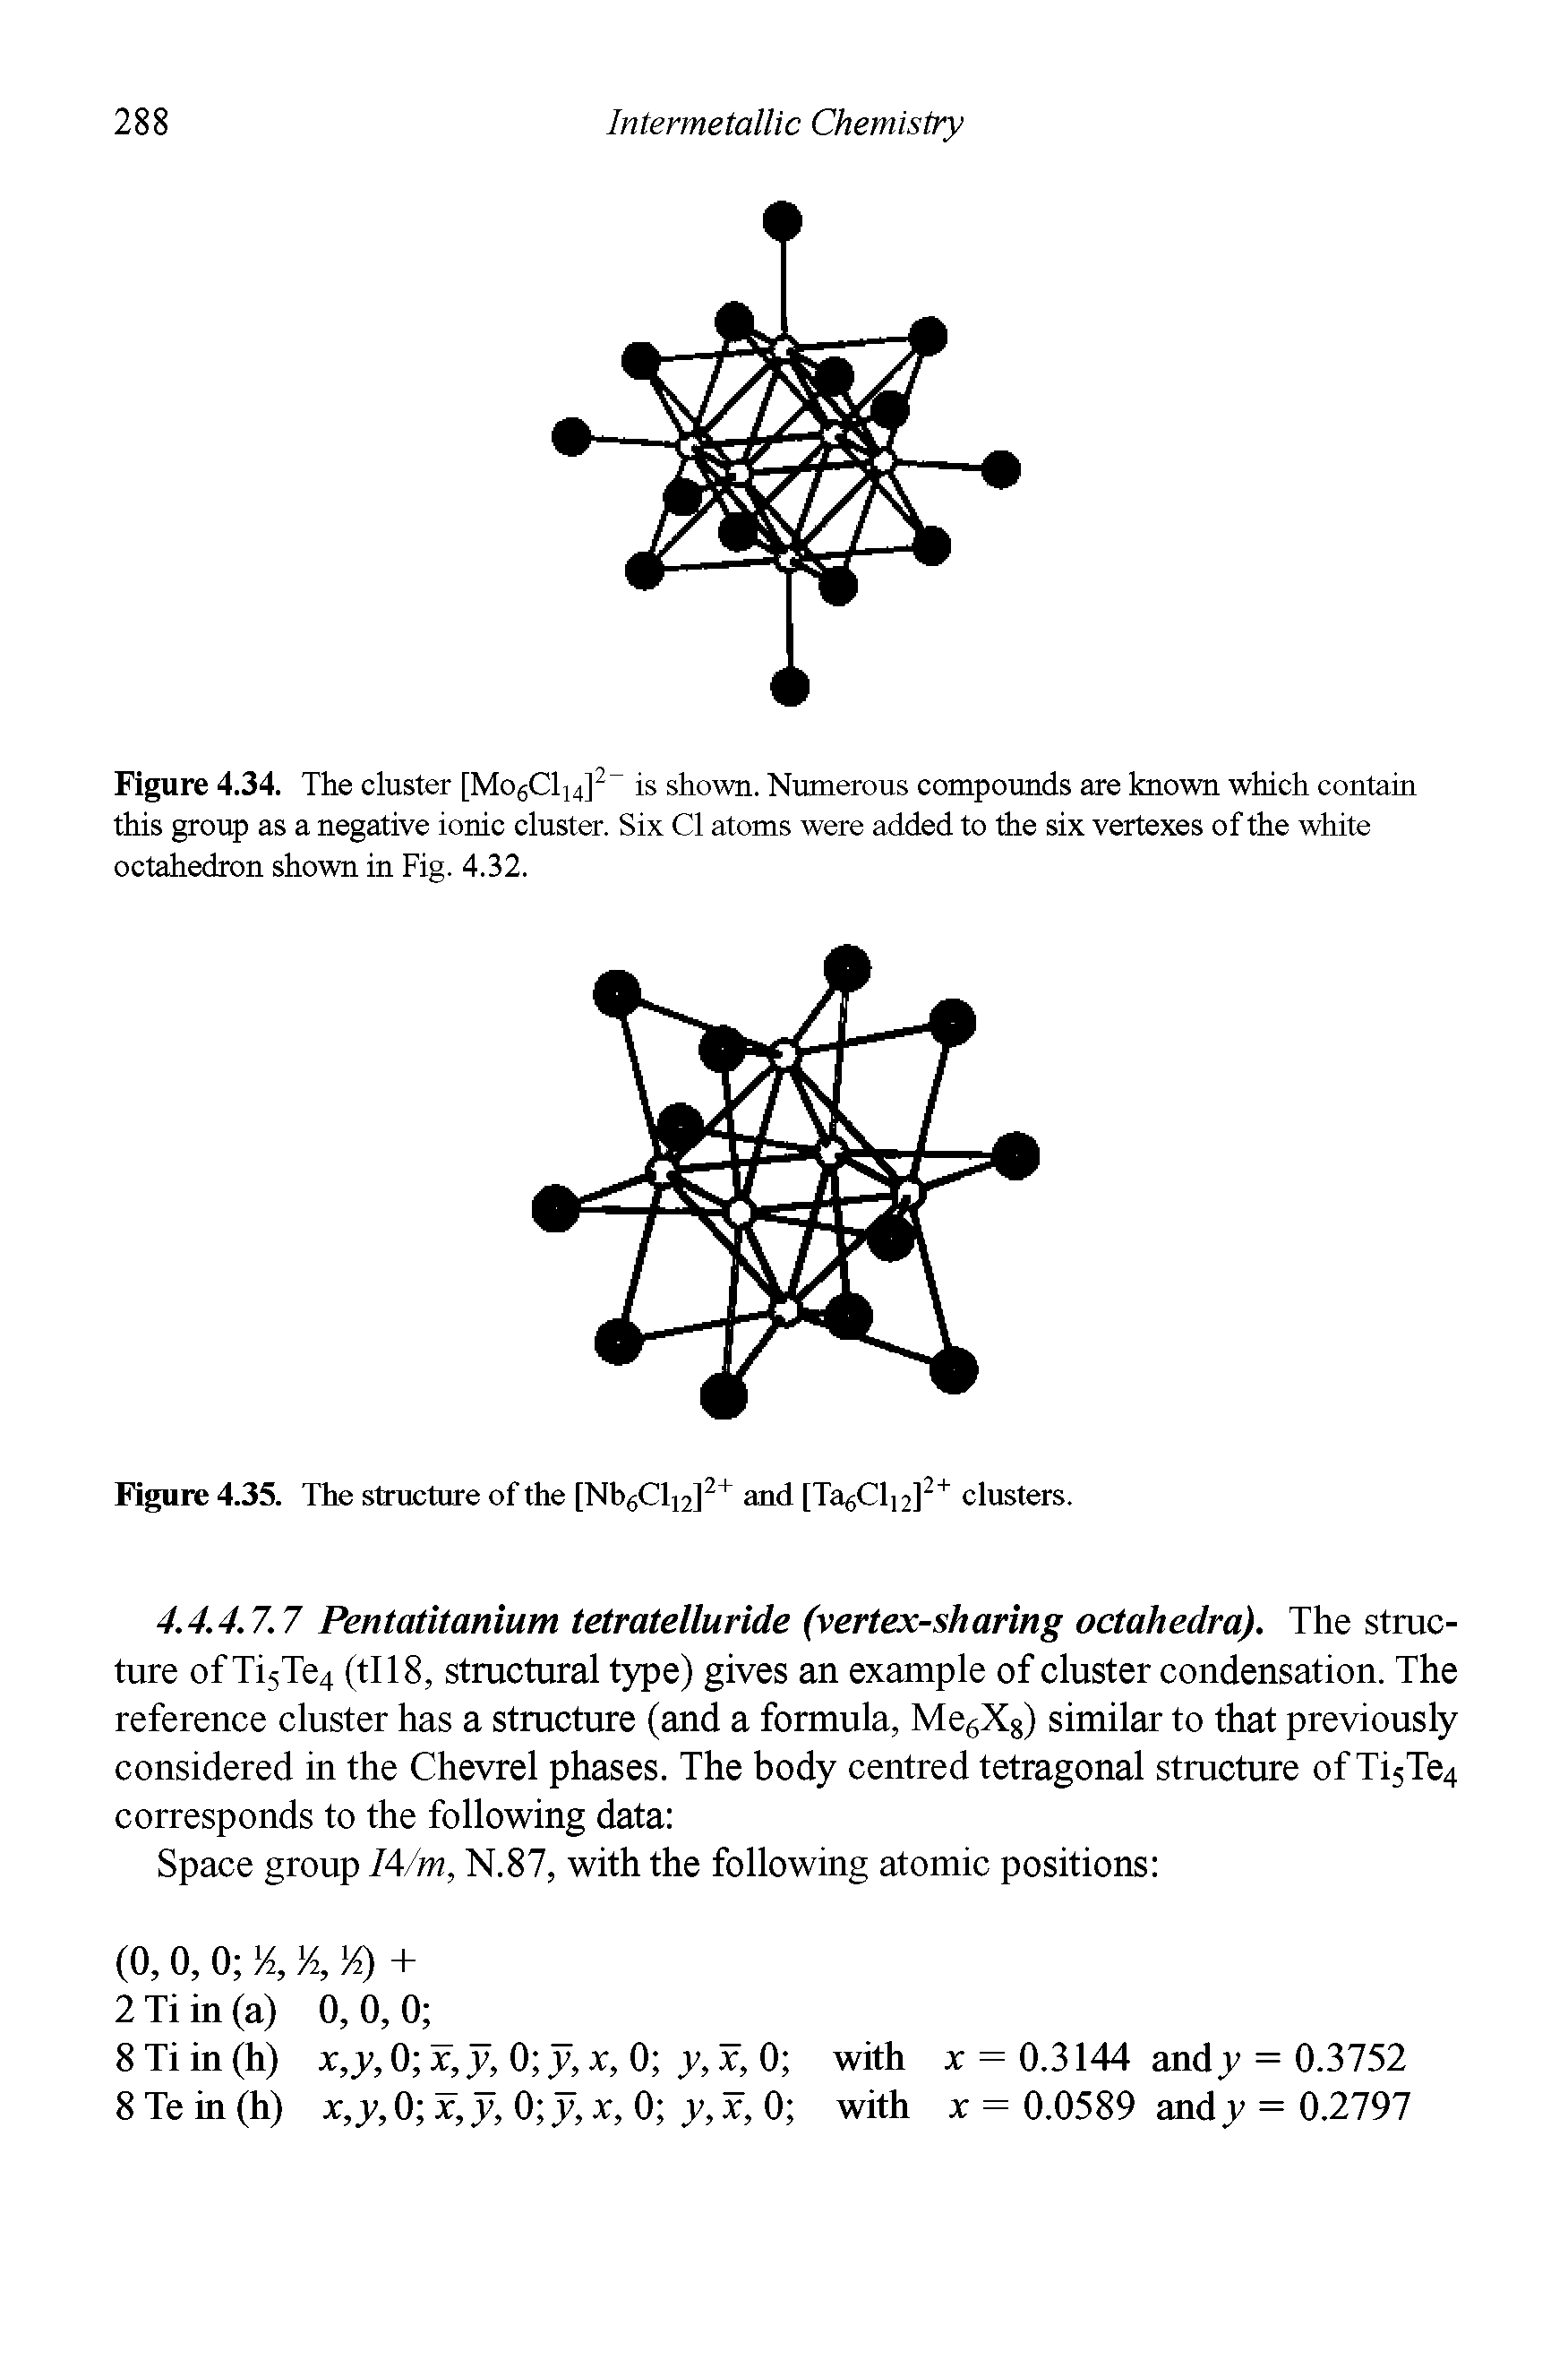 Figure 4.34. The cluster [Mo6C1i4]2 is shown. Numerous compounds are known which contain this group as a negative ionic cluster. Six Cl atoms were added to the six vertexes of the white octahedron shown in Fig. 4.32.